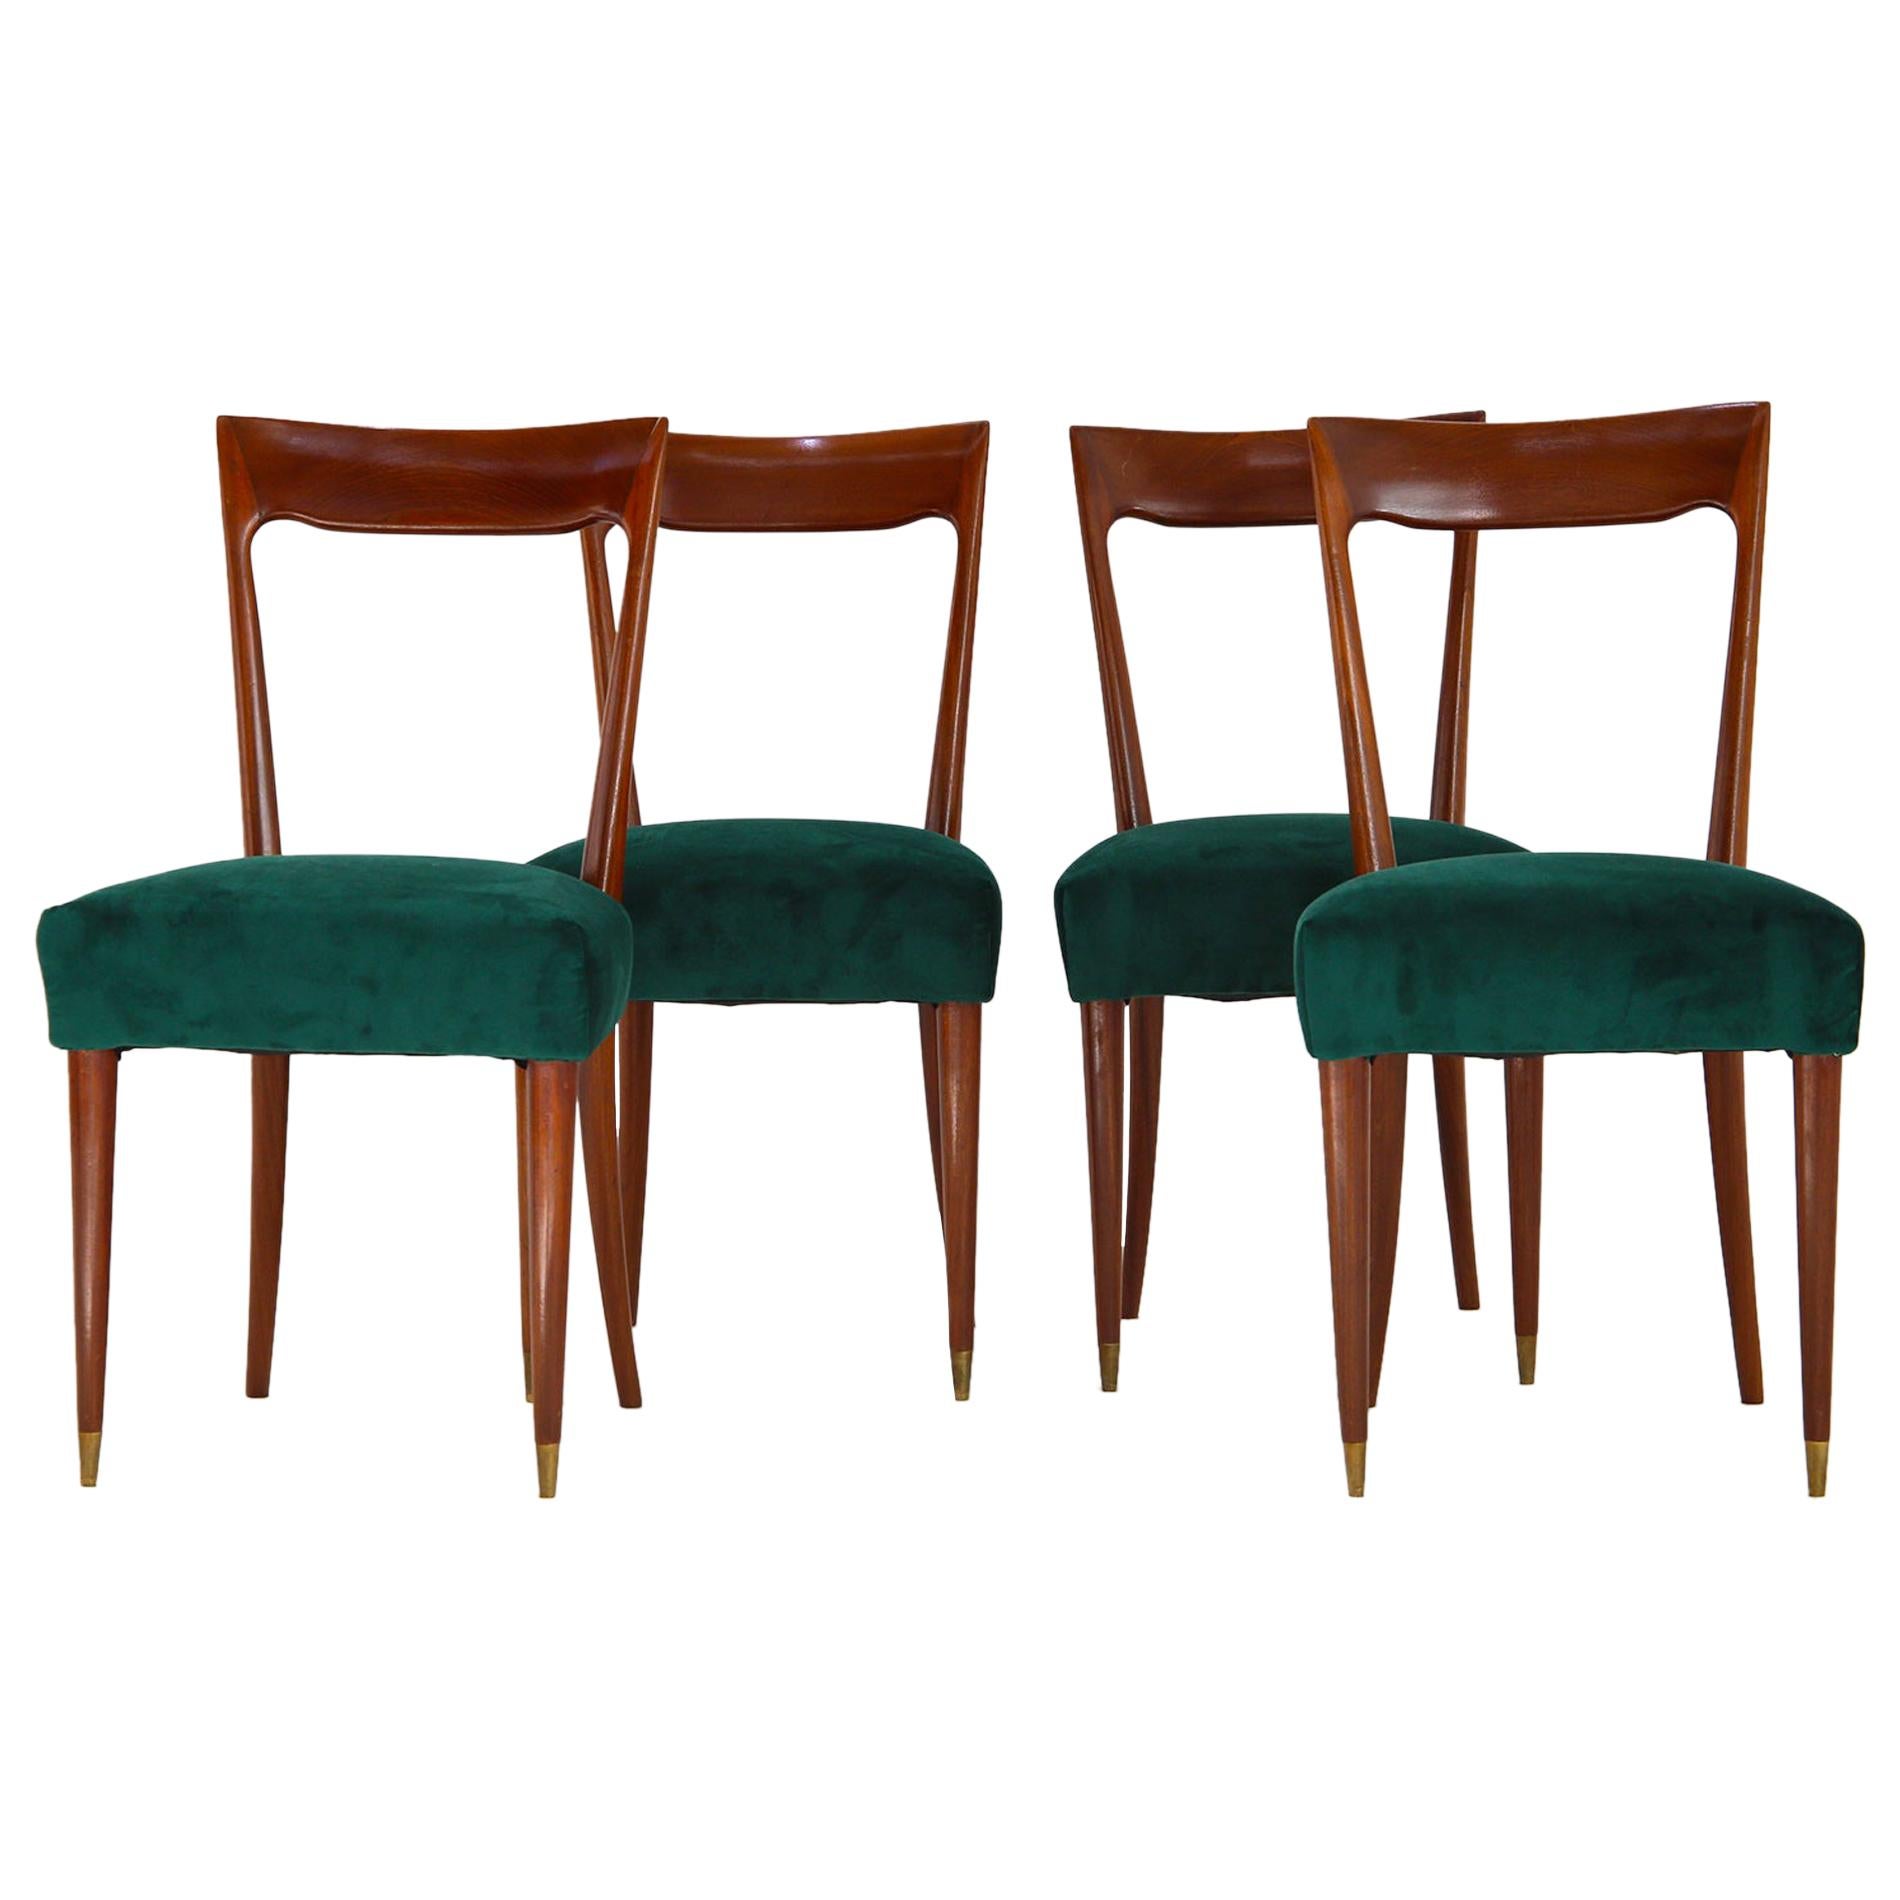 Set of four Dining Chairs Midcentury by Guglielmo Ulrich, 1940s